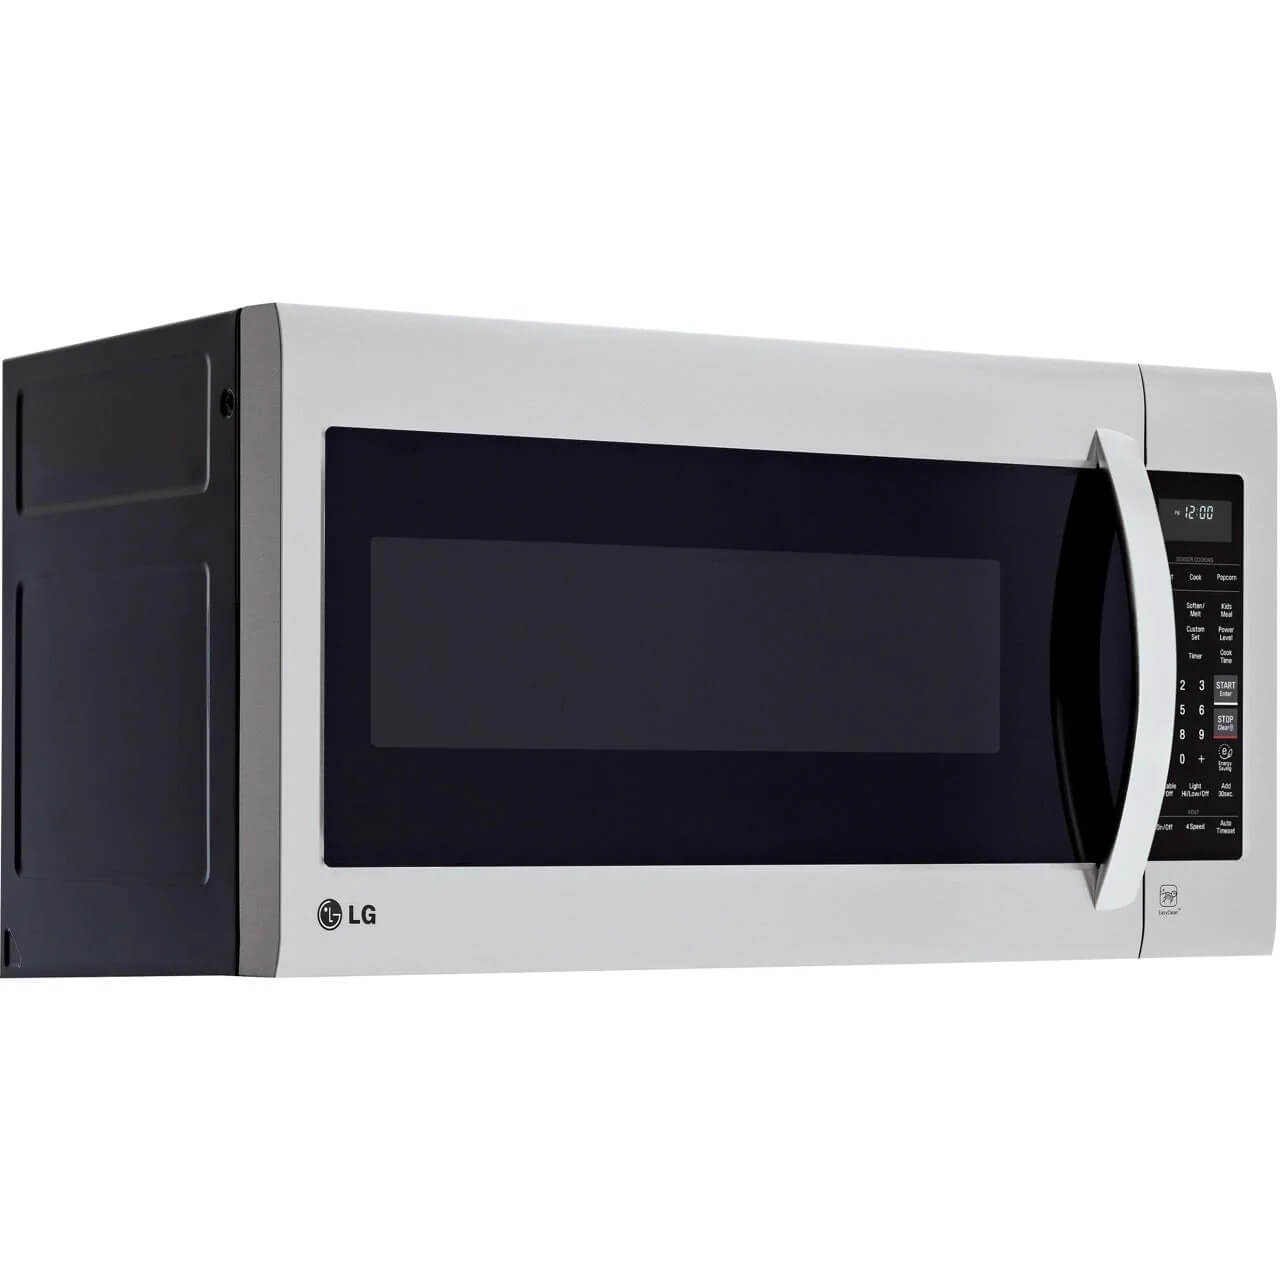 LG Appliances Microwaves 2.0-Cu. Ft. 30 in. Over-the-Range Microwave Oven with EasyClean® in Stainless Steel (LMV2031SS)